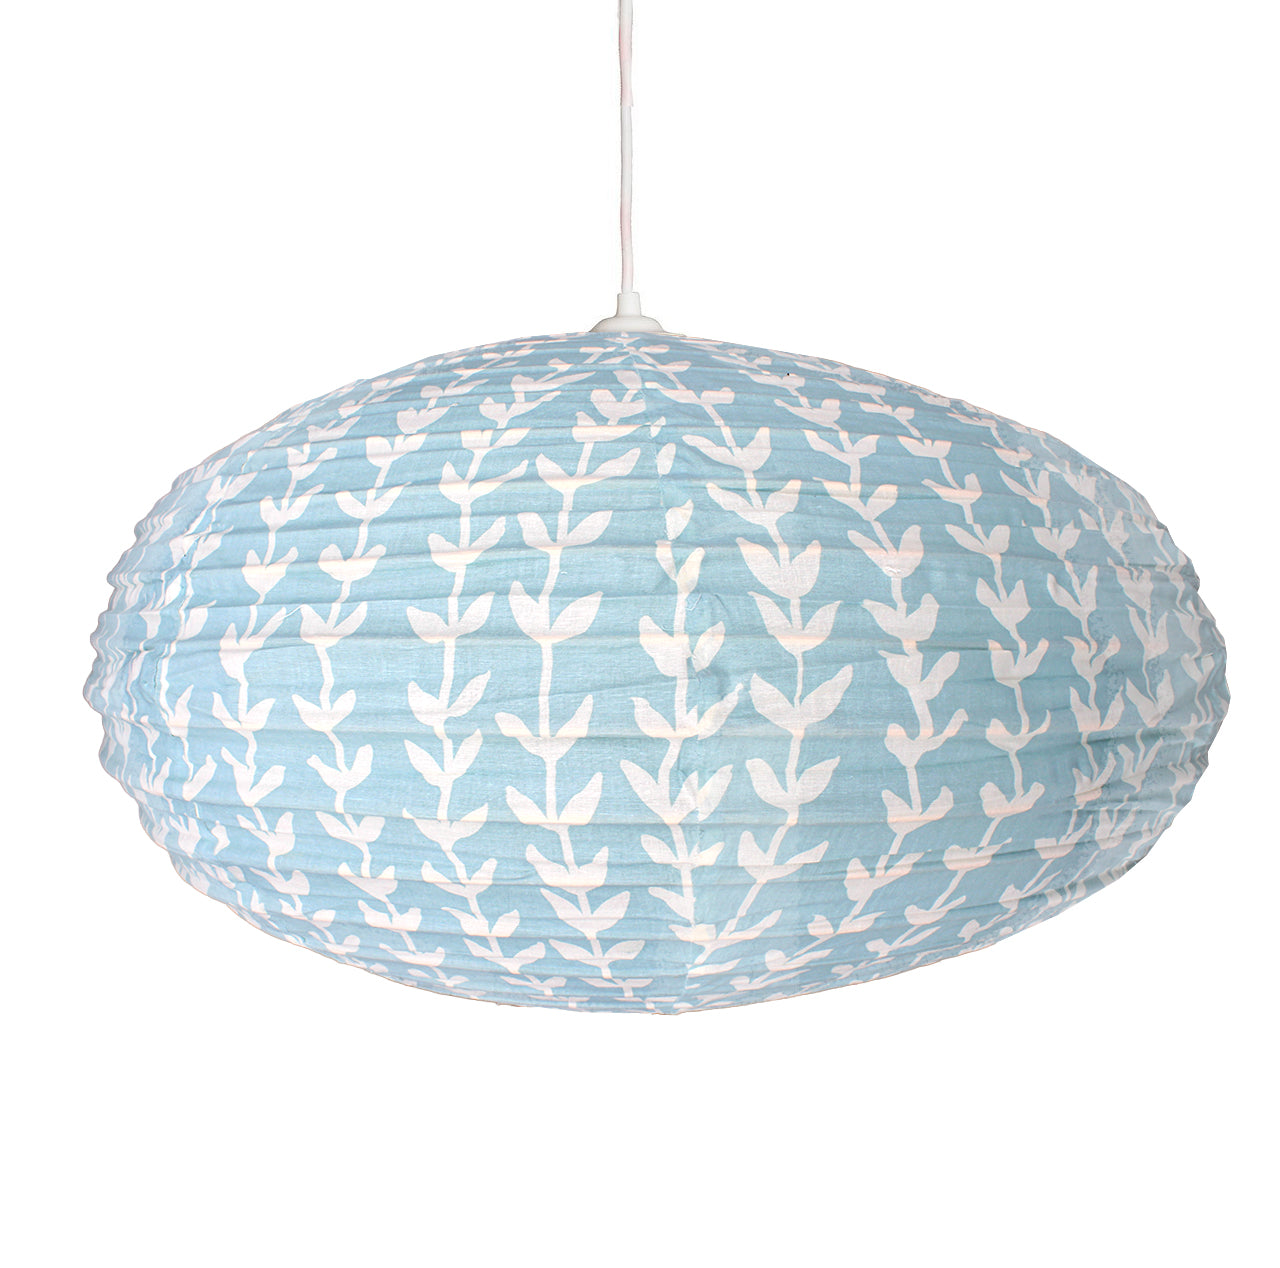 Large 80cm Cream & Pale Blue String of Hearts Cotton Pendant Lampshade